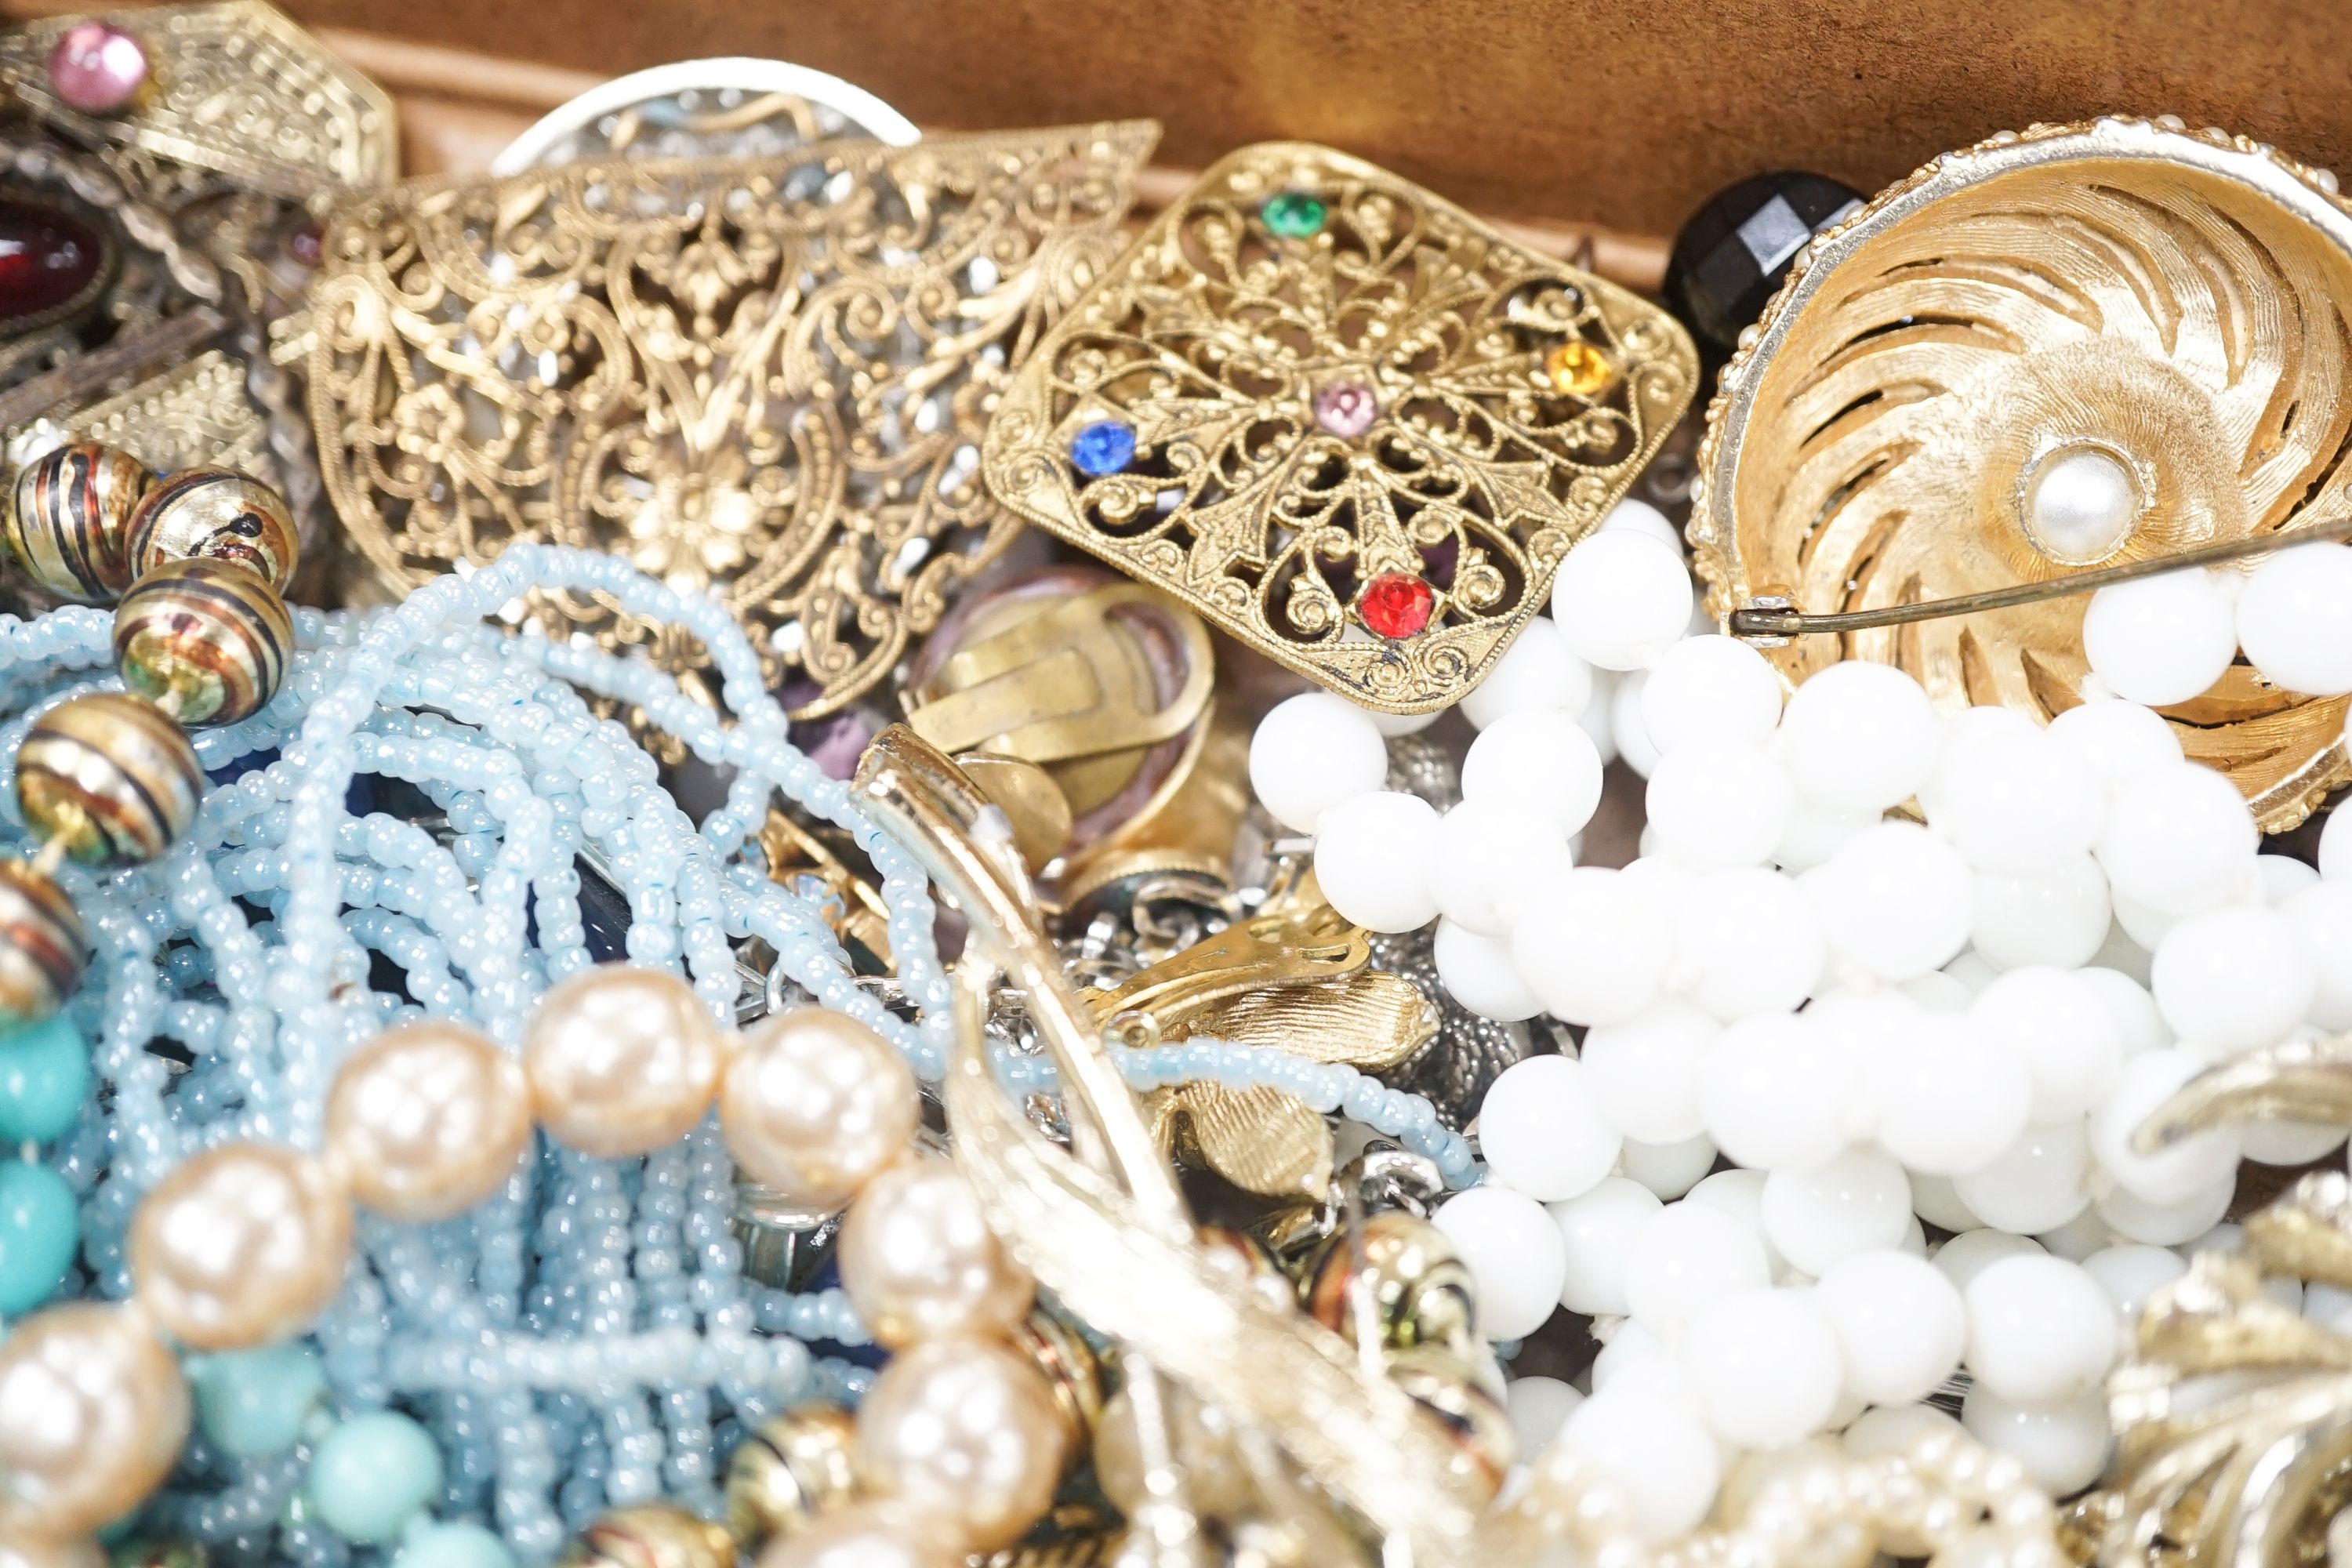 A large quantity of mixed costume jewellery.